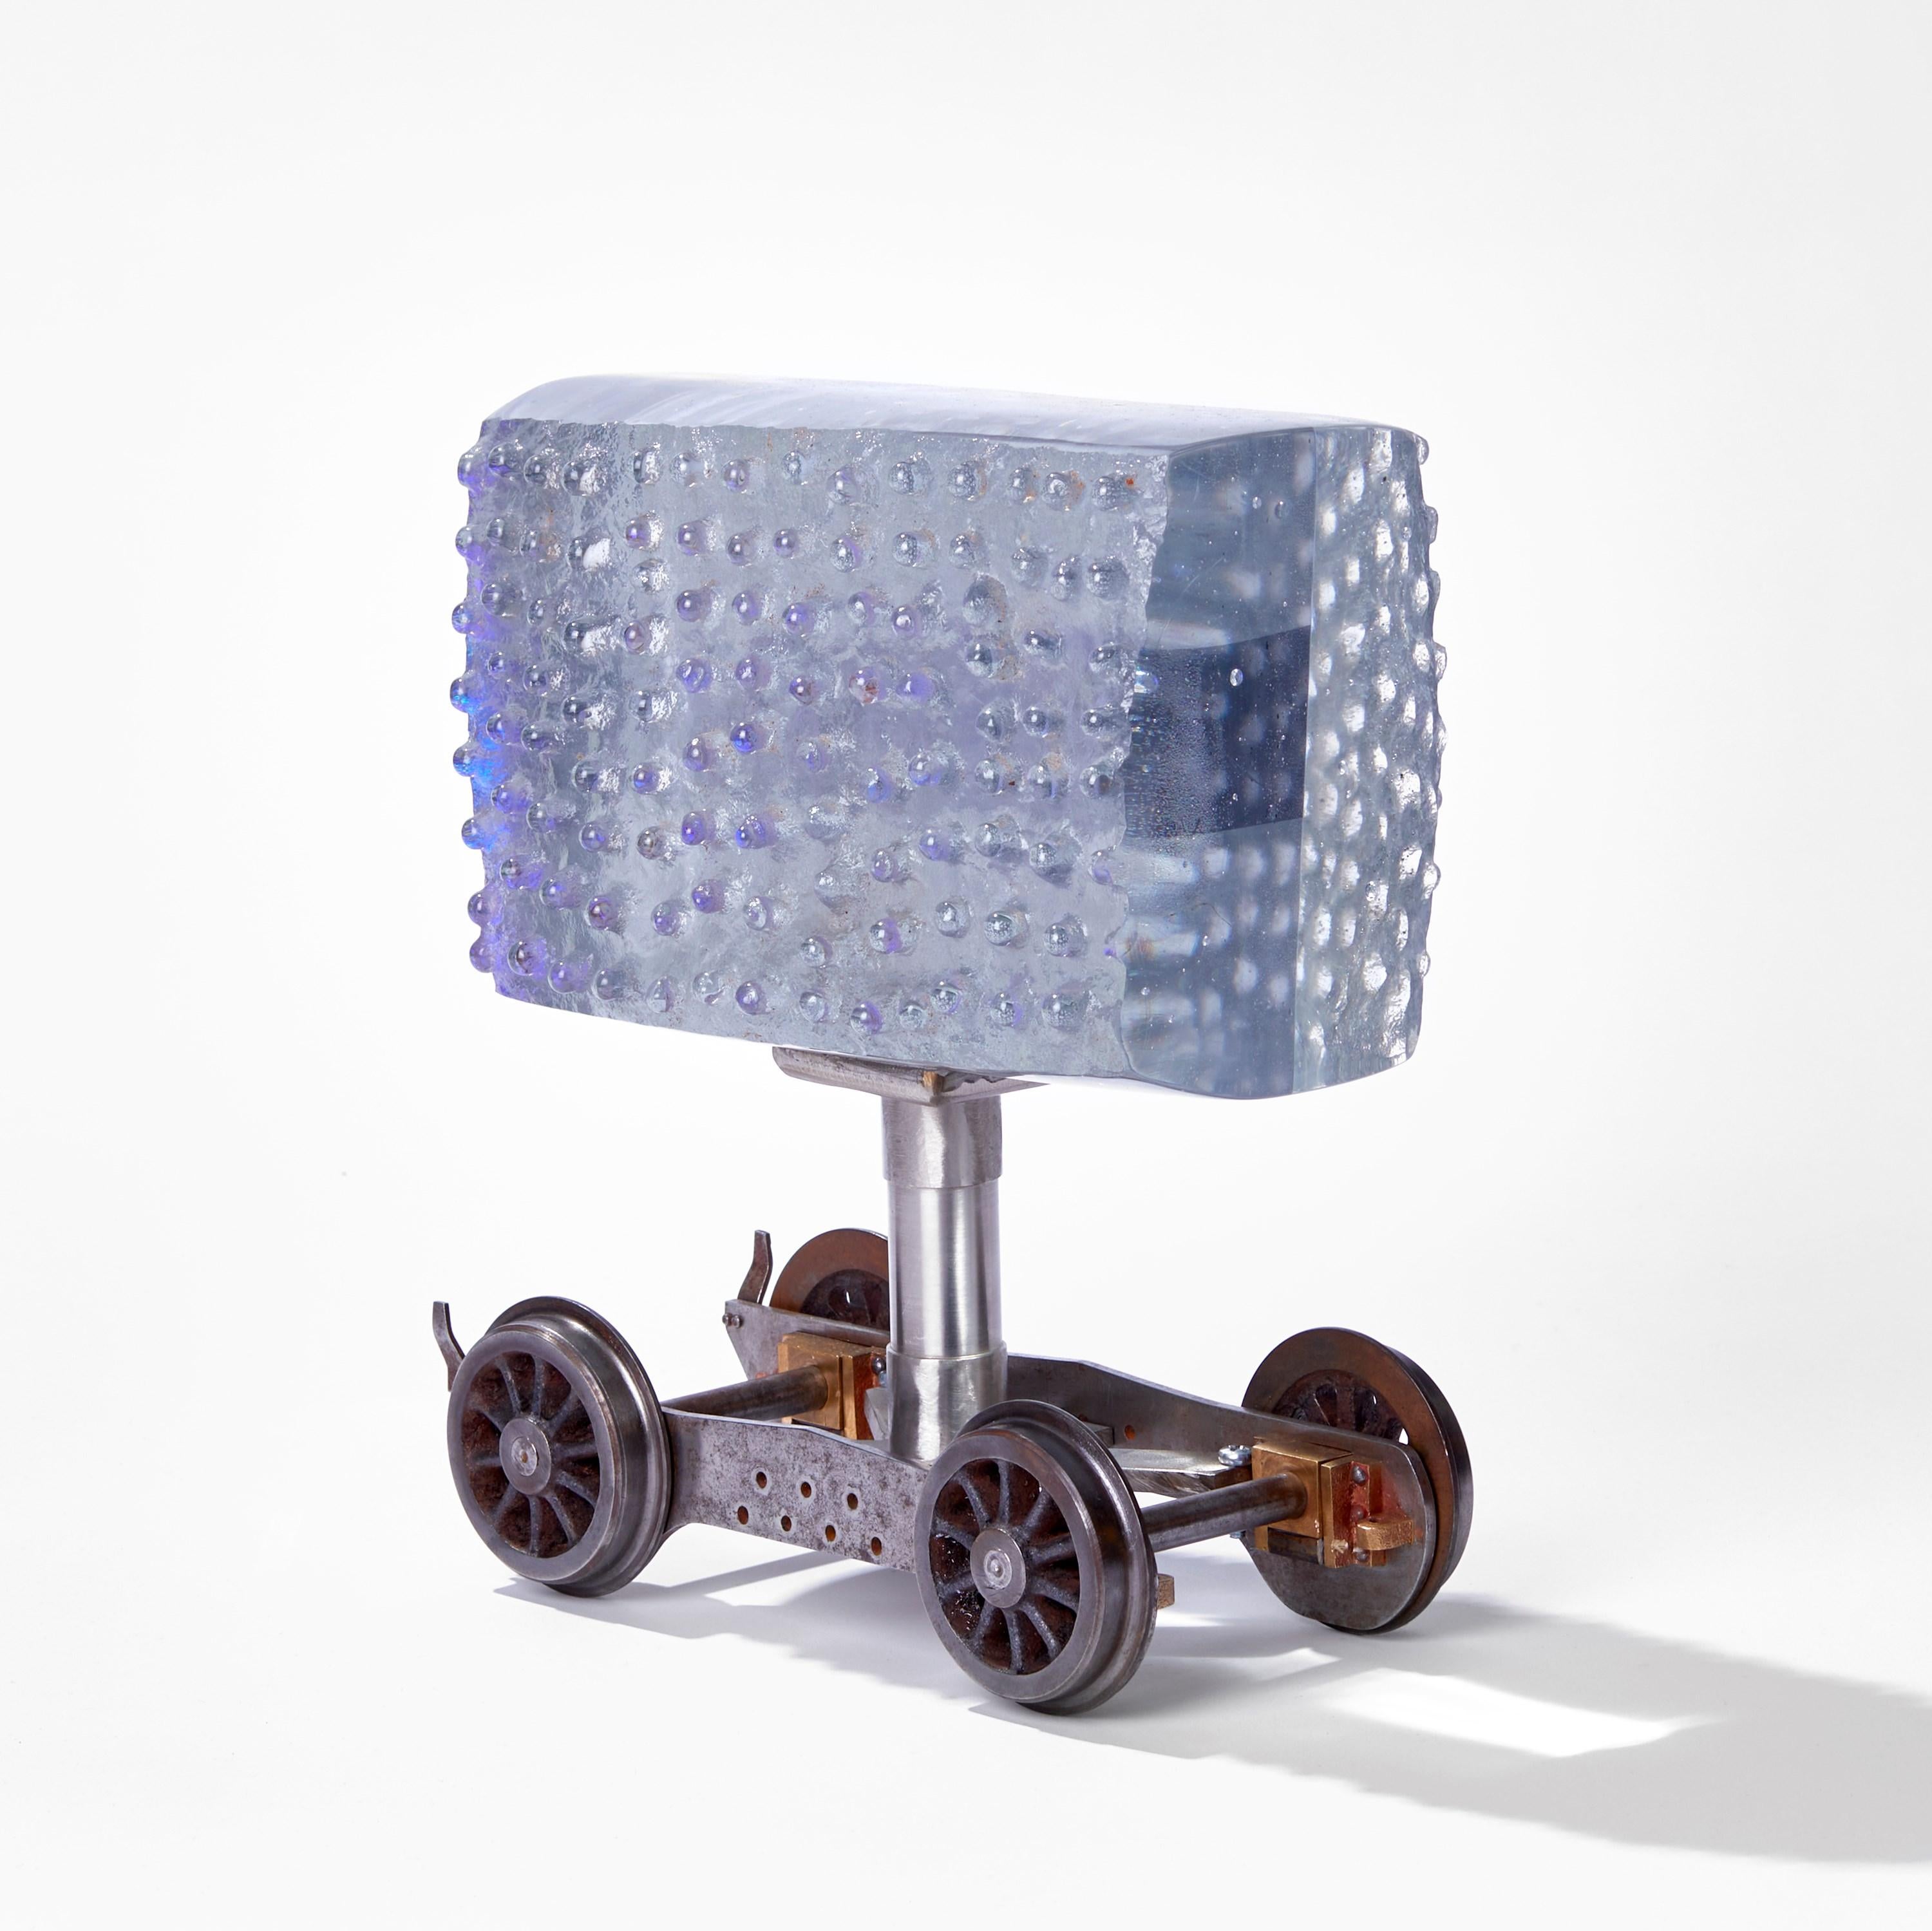 Hand-Crafted  Phateon, a steel & glass train / locomotive inspired sculpture by Jon Lewis For Sale